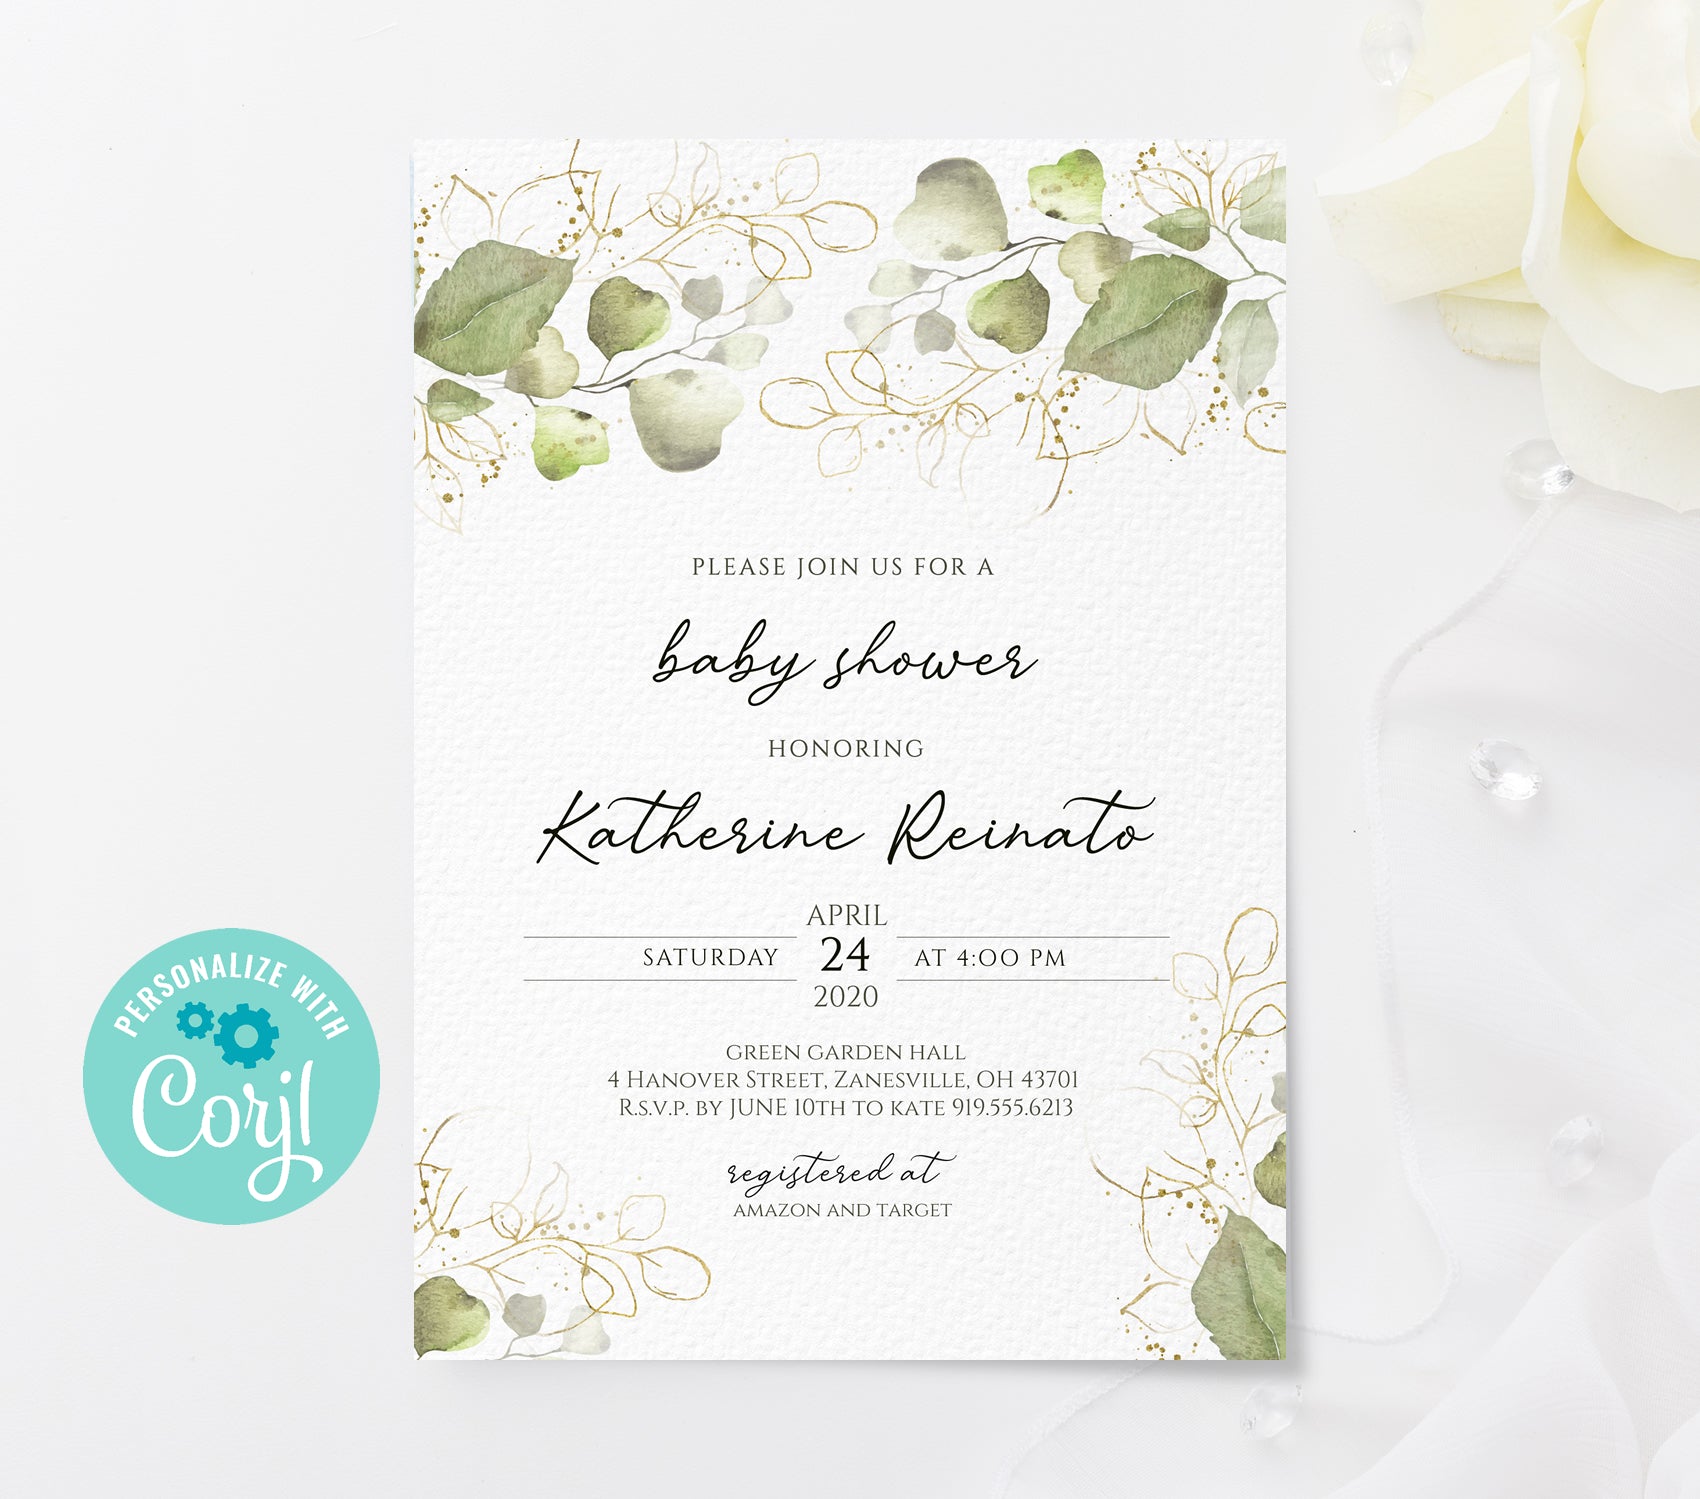 Sage green and rose gold gender neutral baby shower colors